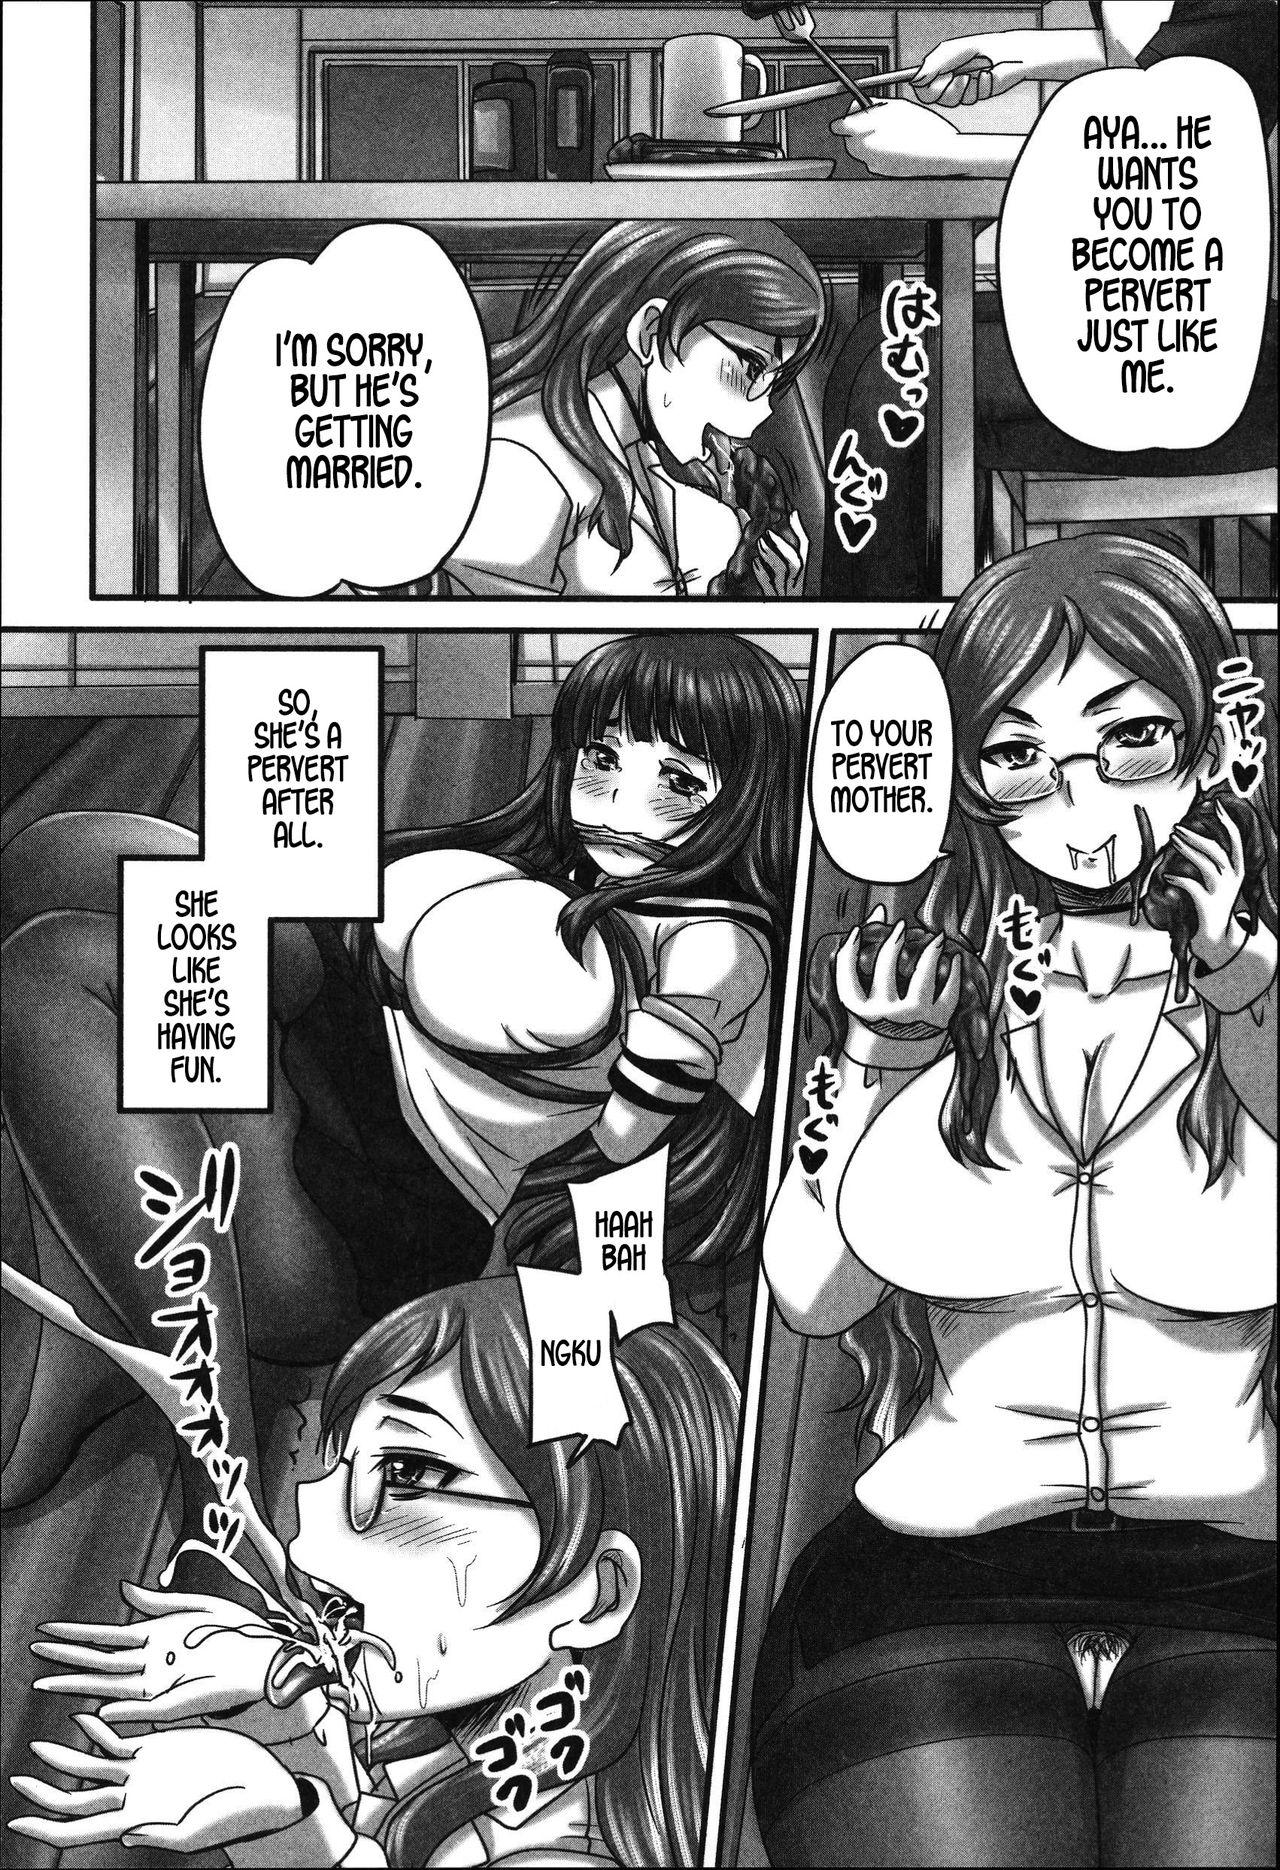 Chica Ikkadanran/Haha Musume Danran | Happy Family Get-Together Step - Page 10